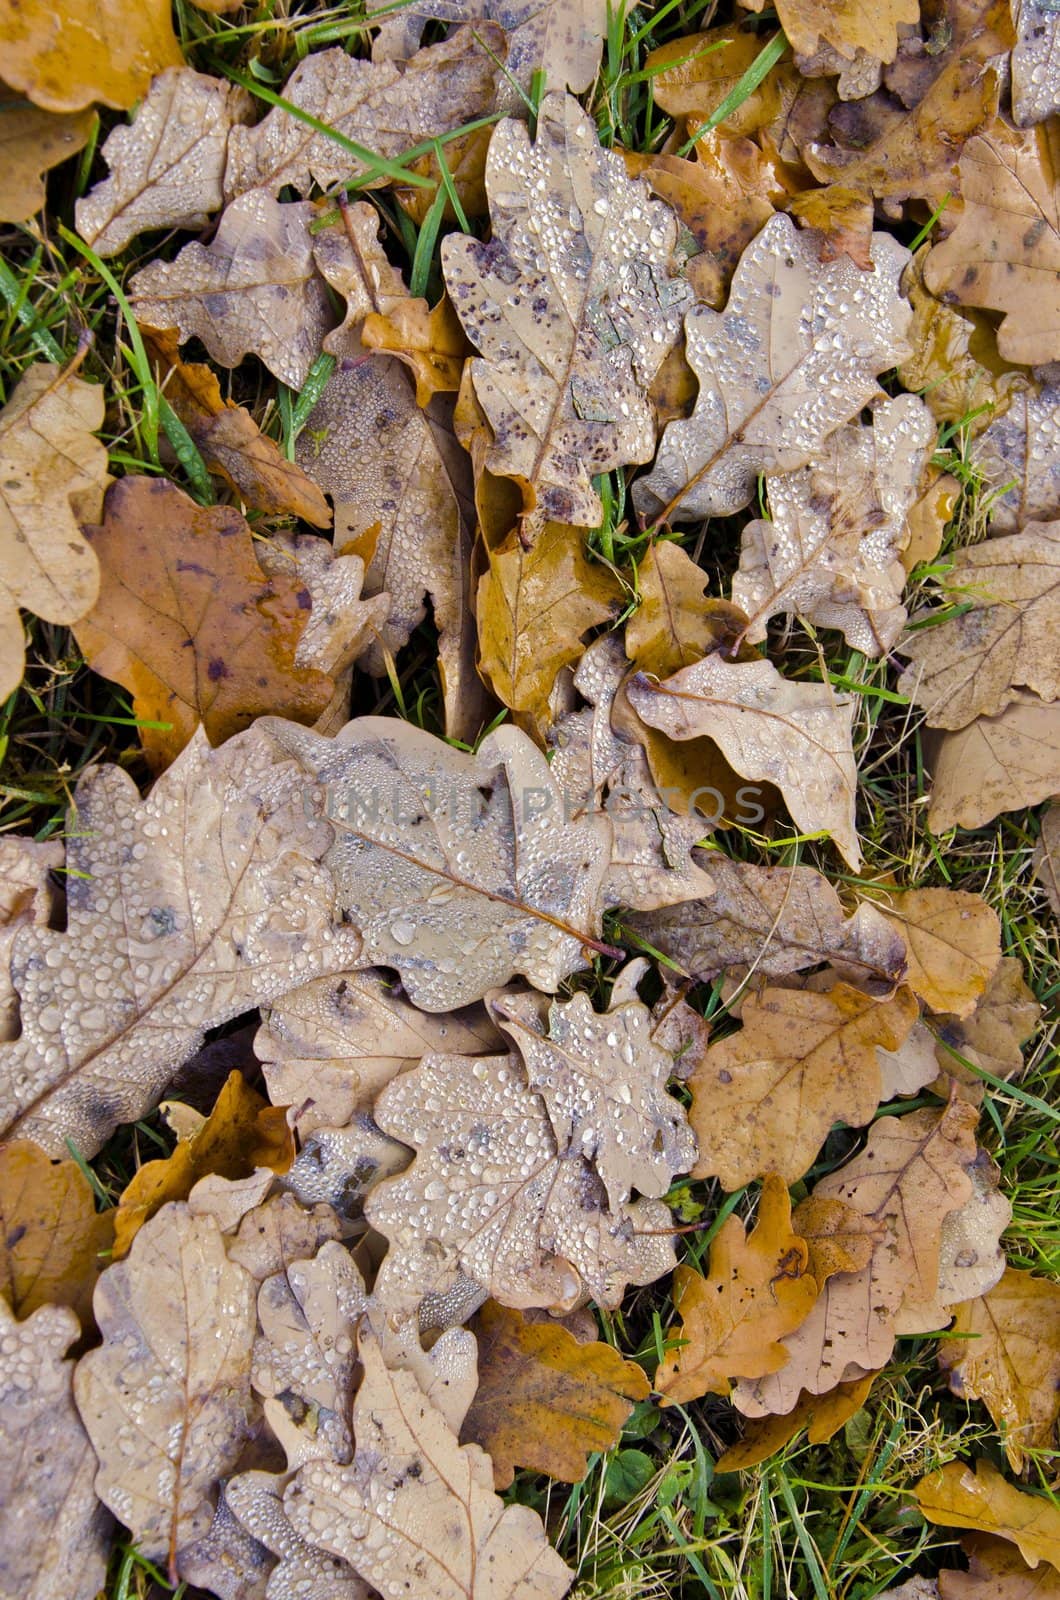 Water drops on oak leaves lying on the ground. Autumn natural background.